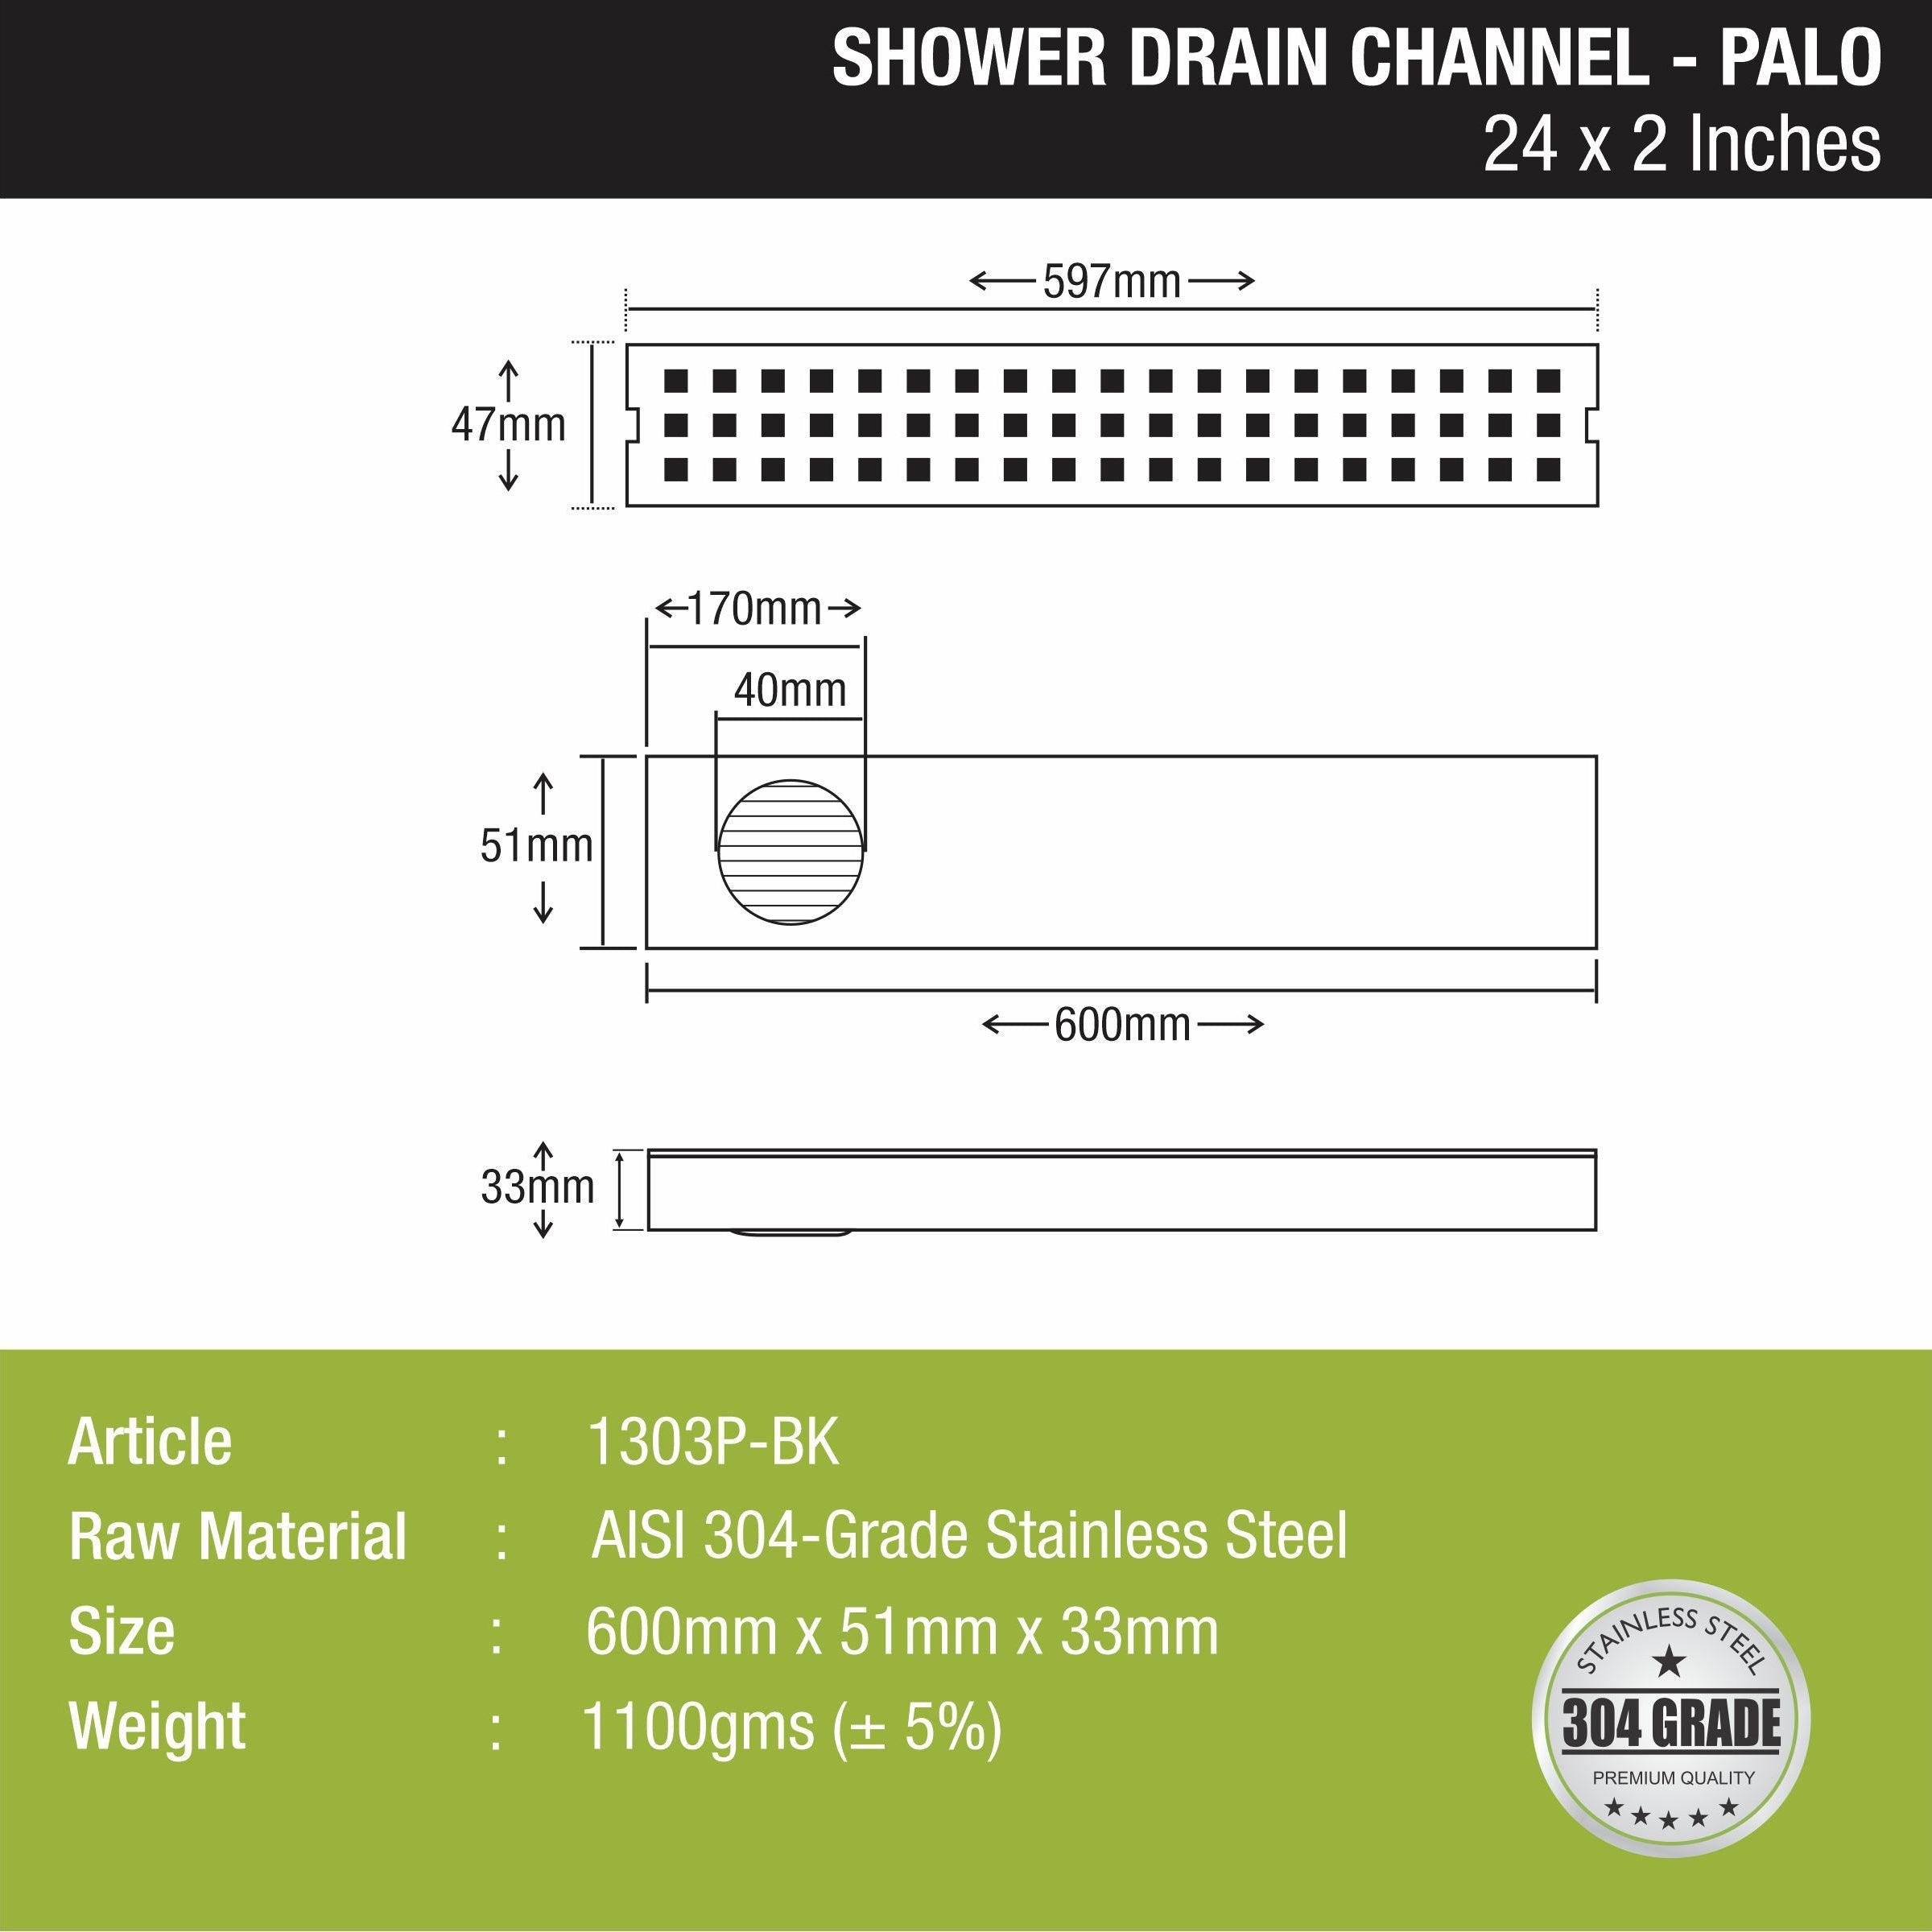 Palo Shower Drain Channel - Black (24 x 2 Inches) size and measurement